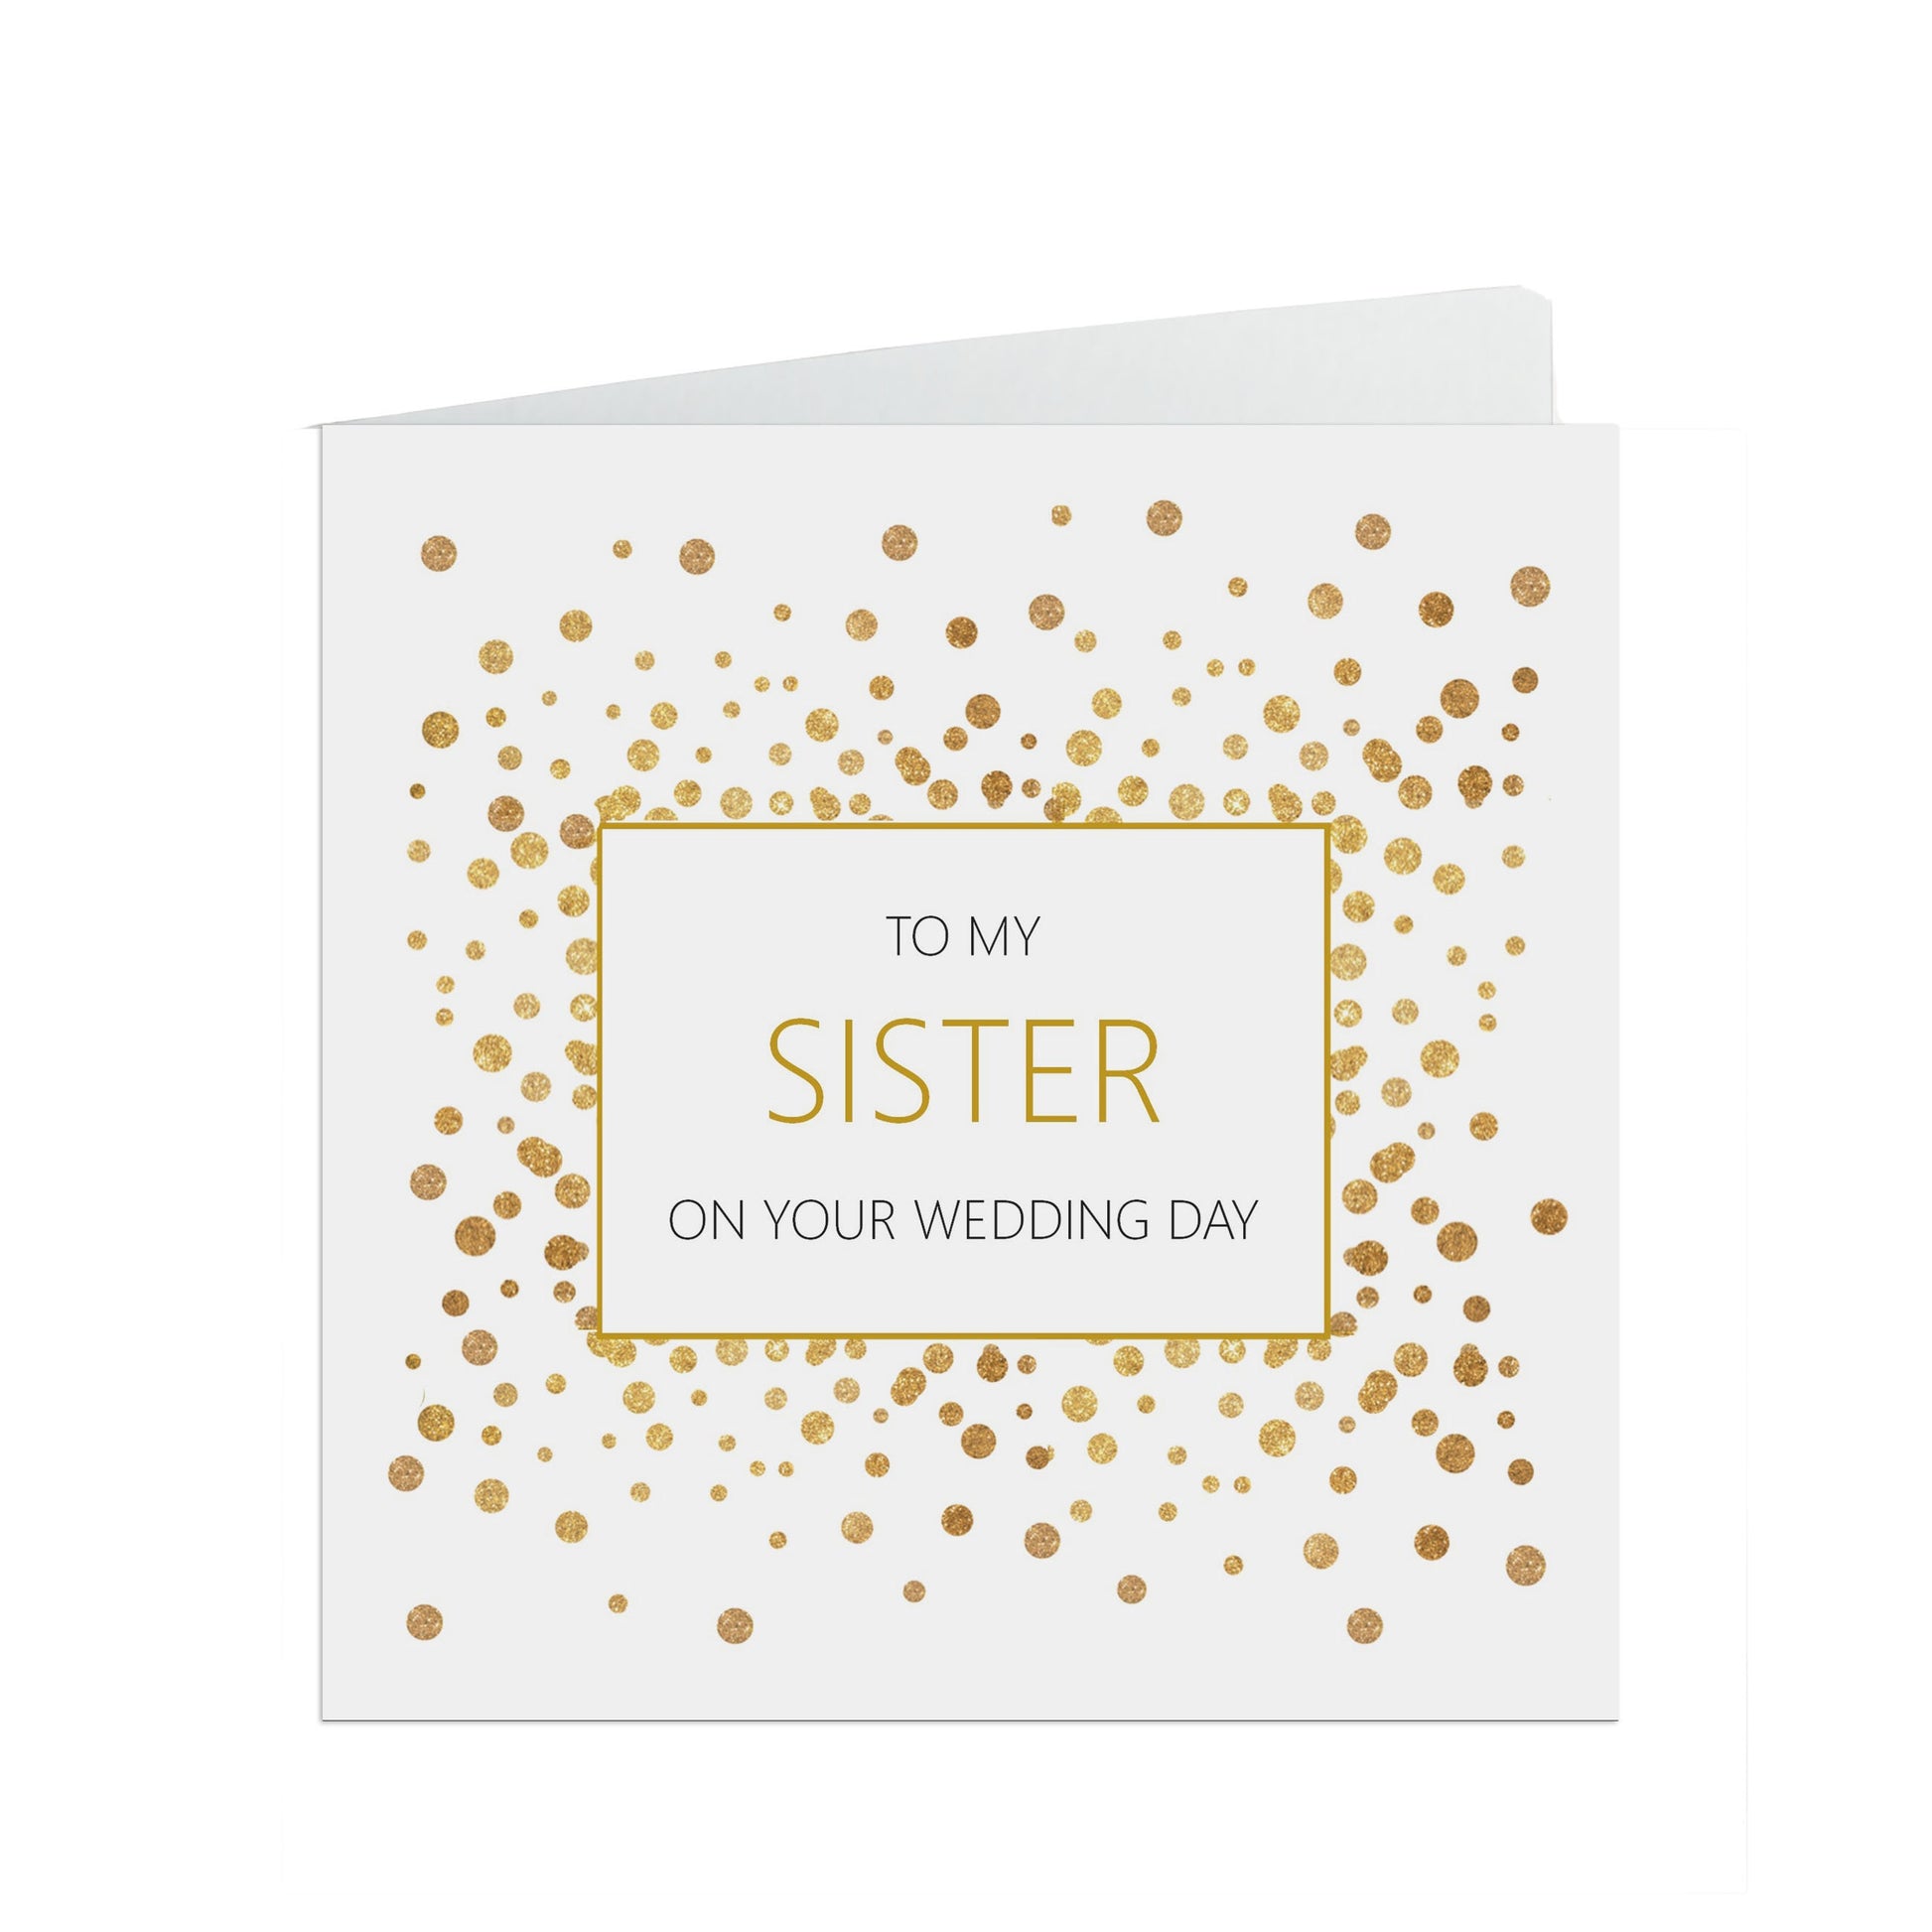 Sister On Your Wedding Day Card, Gold Effect Confetti 6x6 Inches With A White Envelope